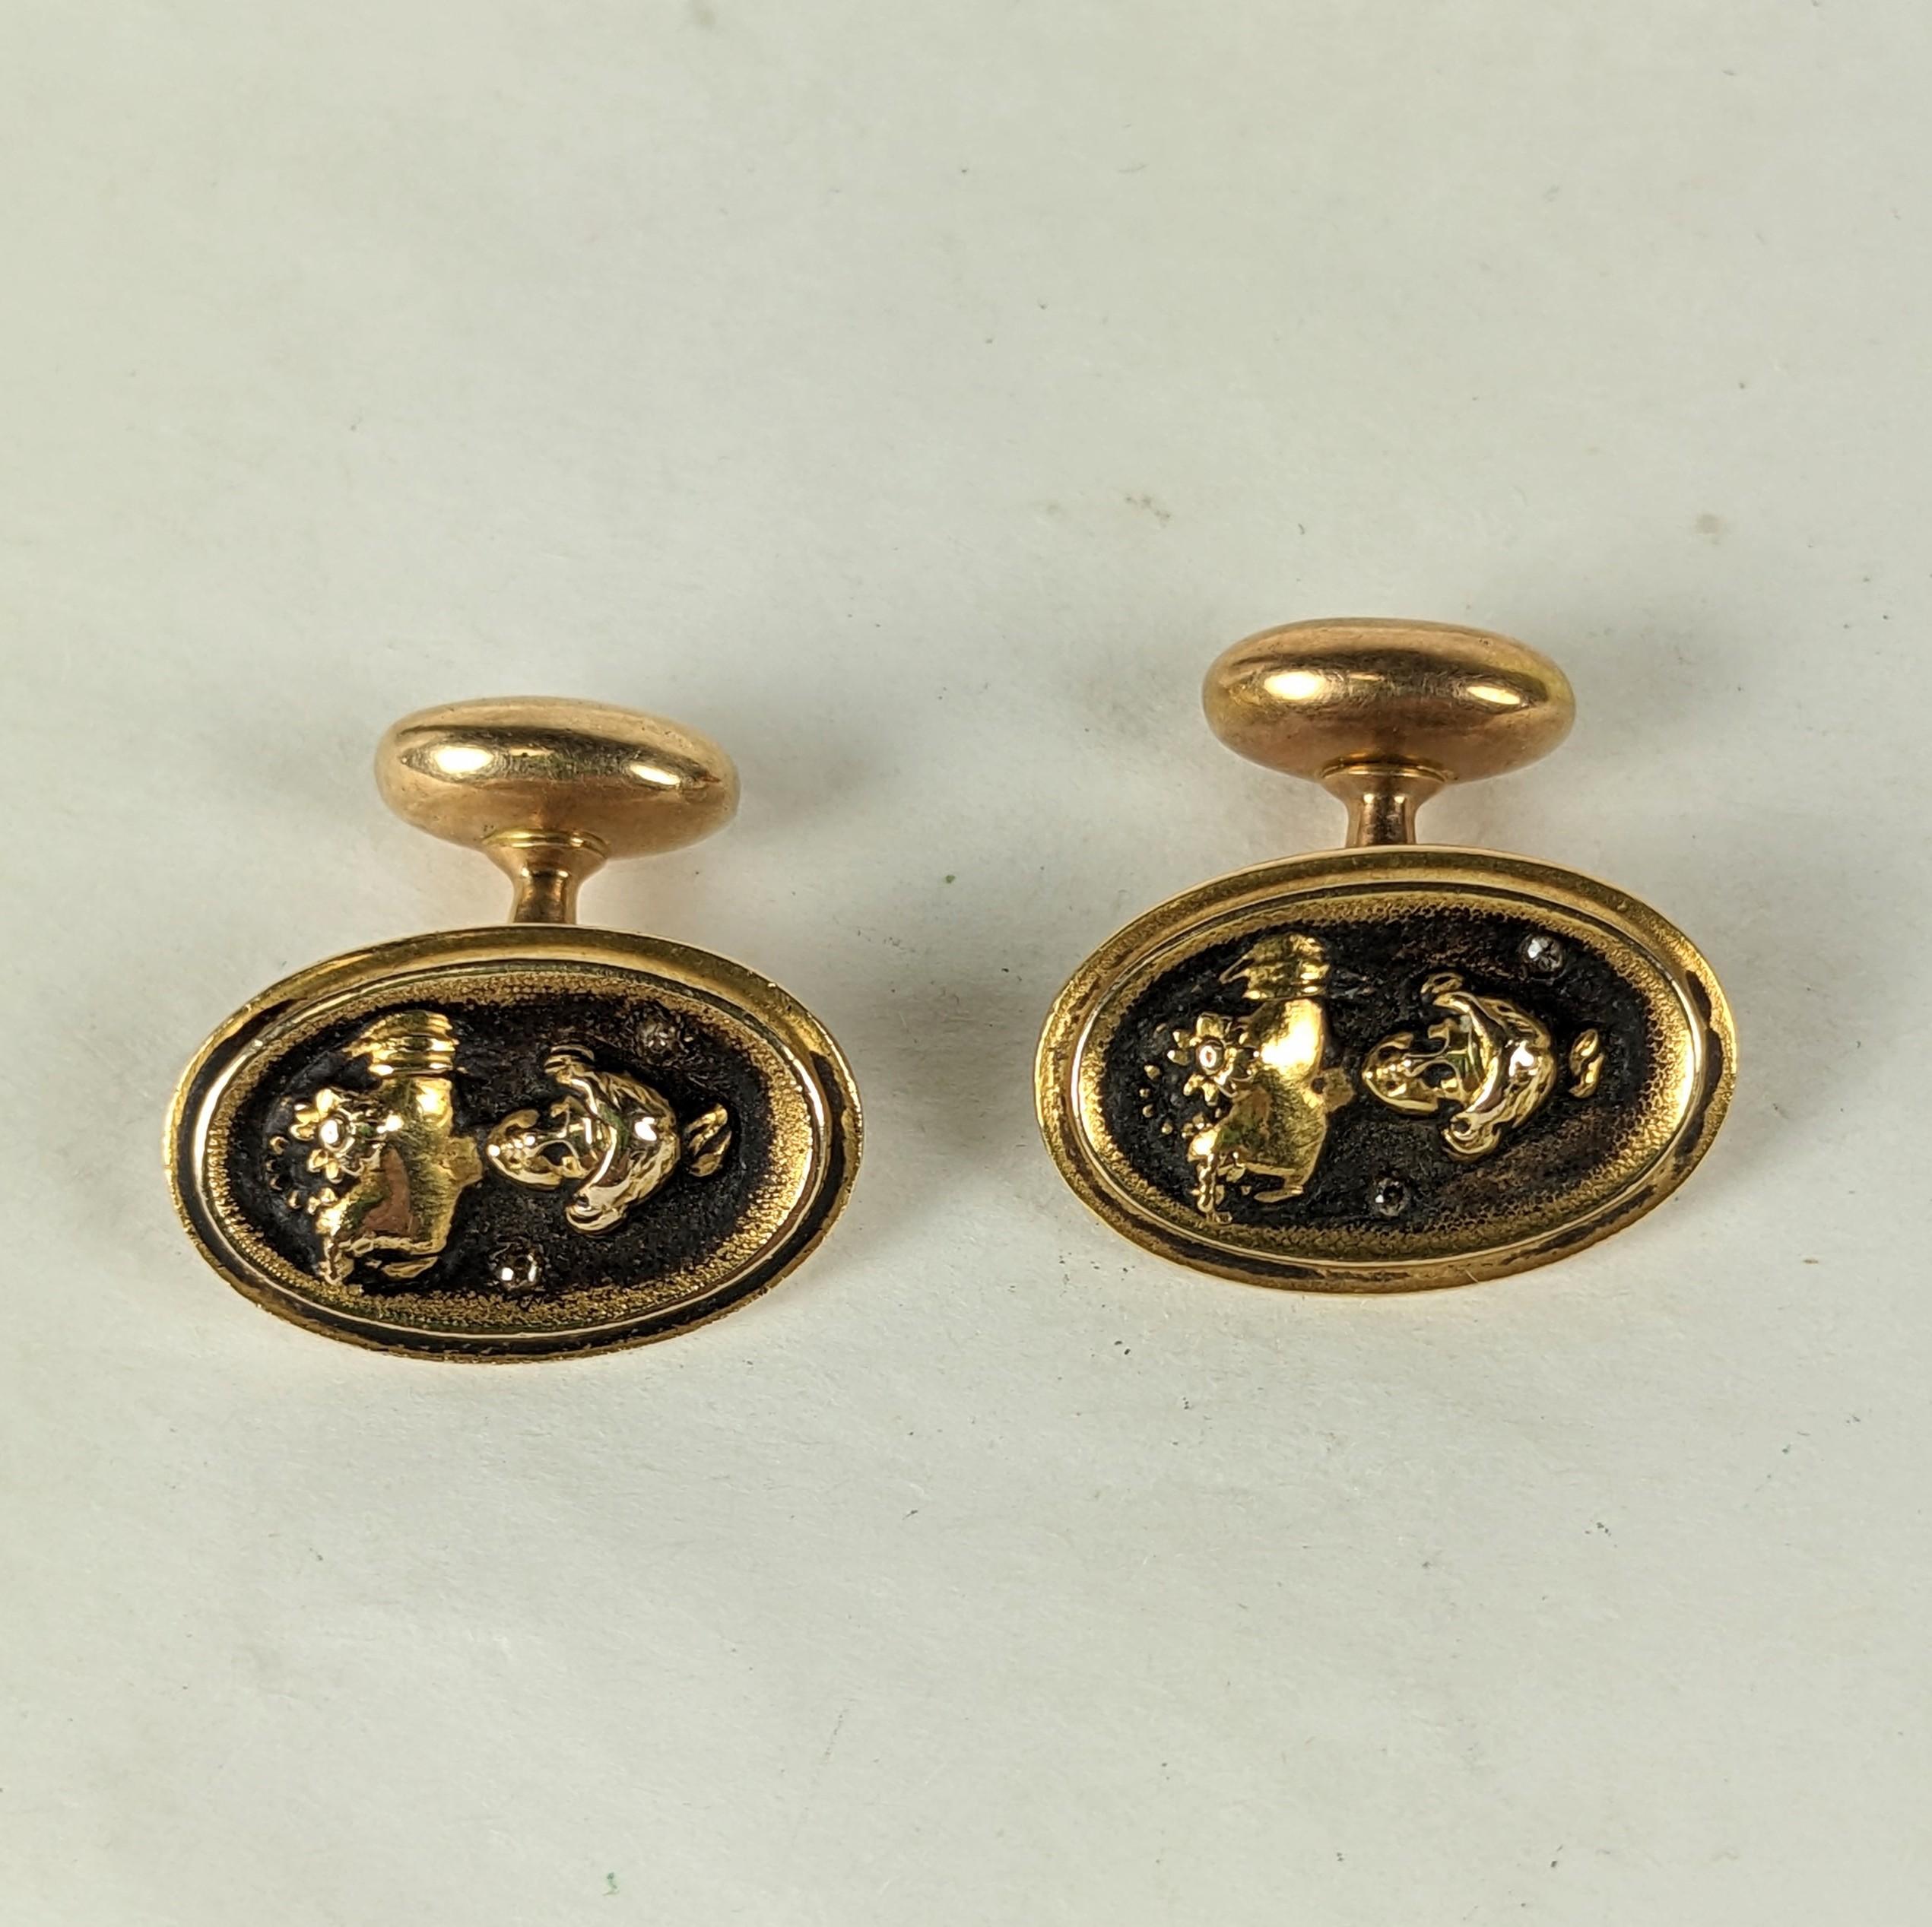 14k Art Nouveau Maiden Cufflinks In Good Condition For Sale In New York, NY